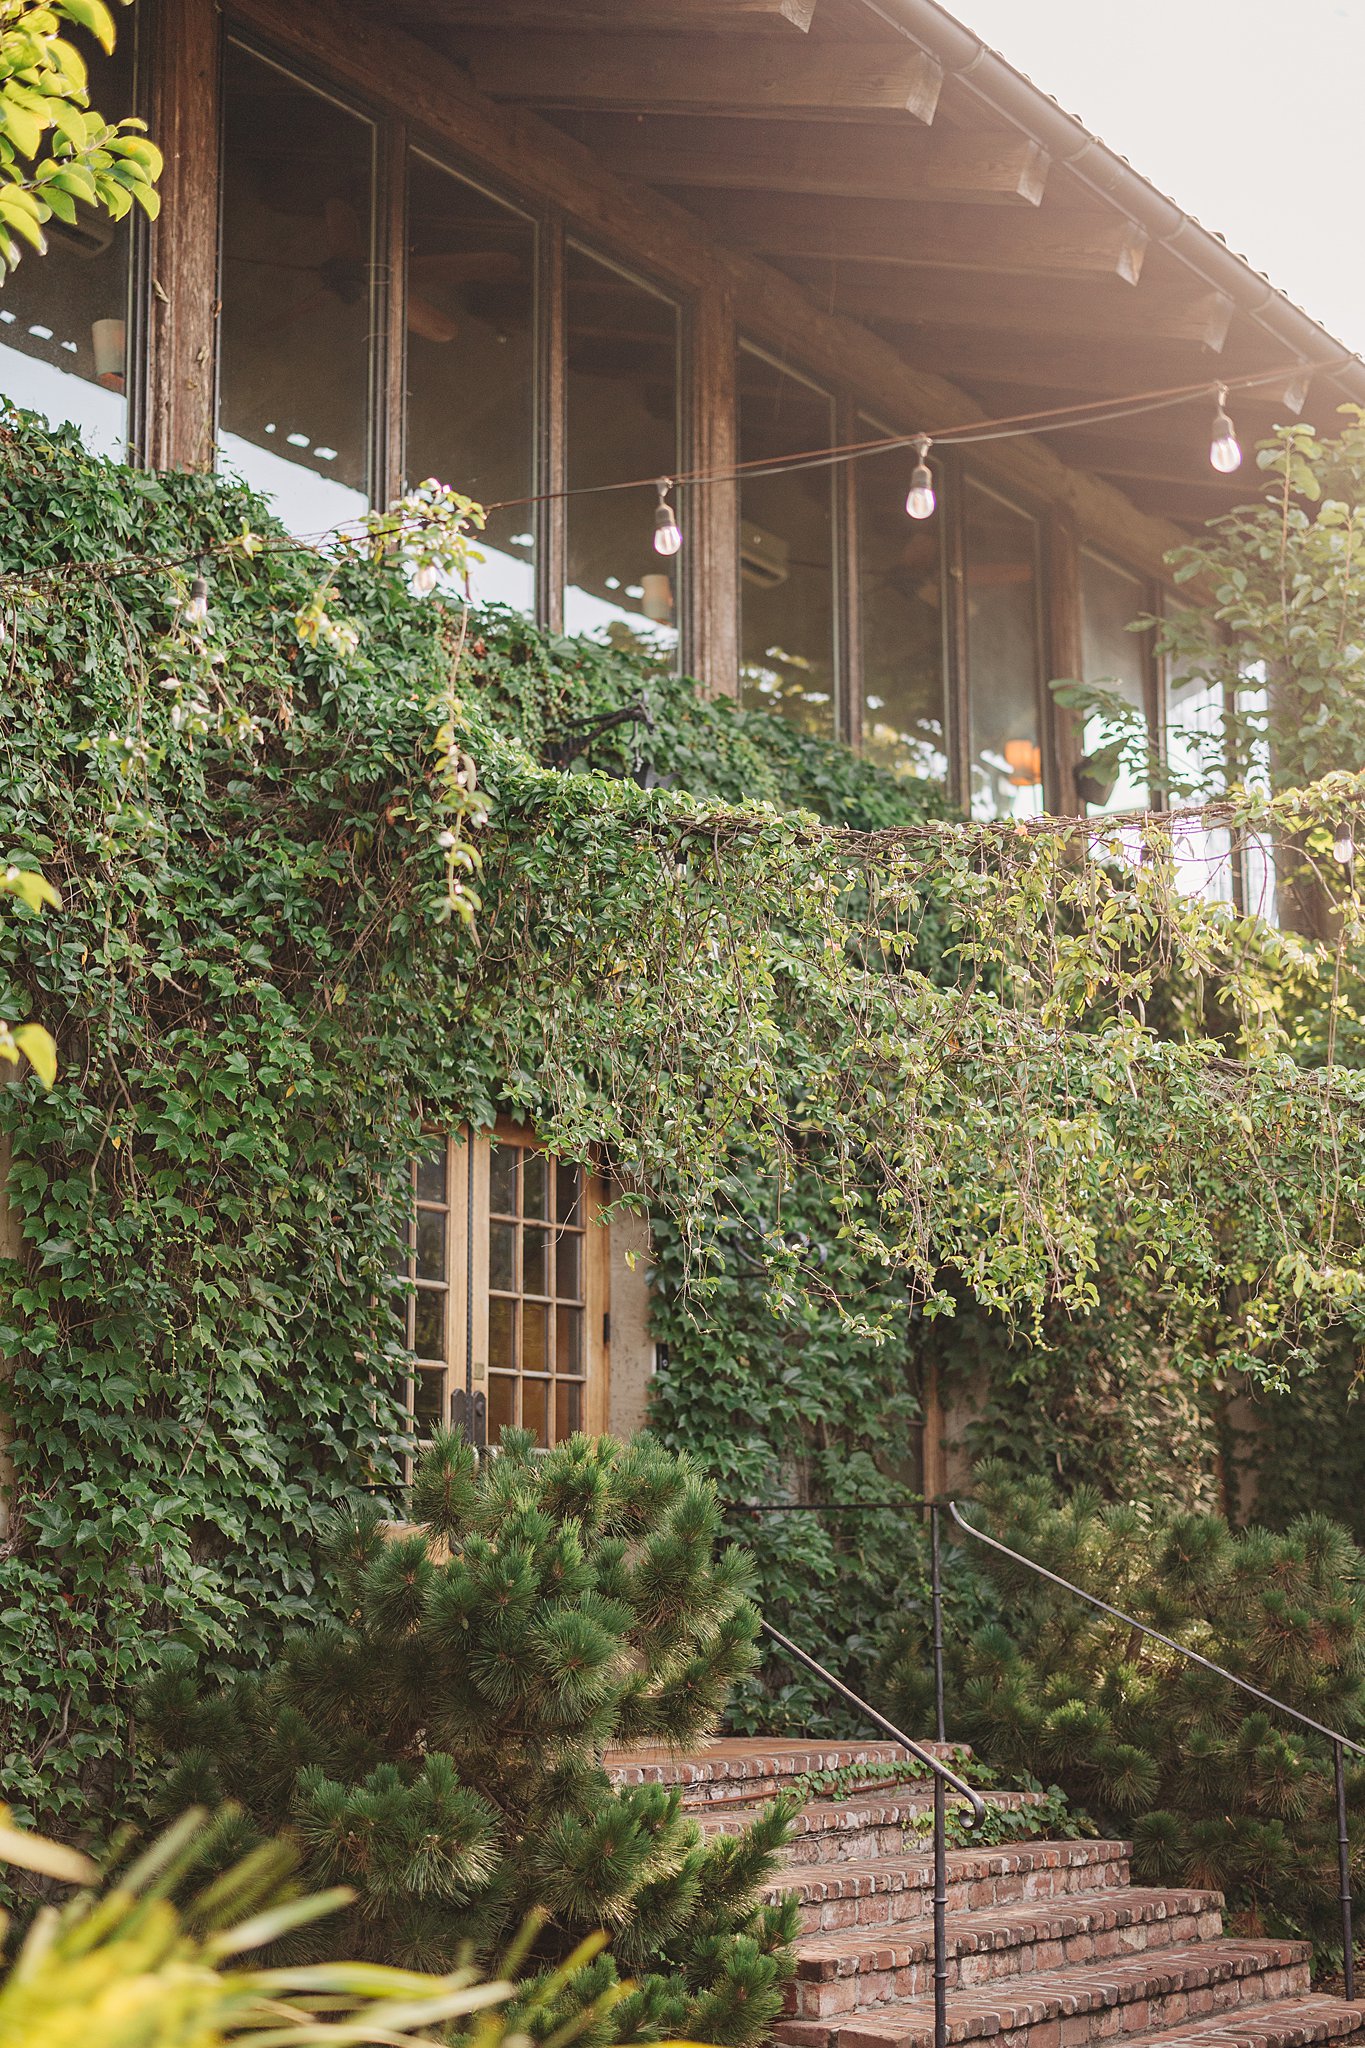 Details of the ivy covered walls of the summerour studio